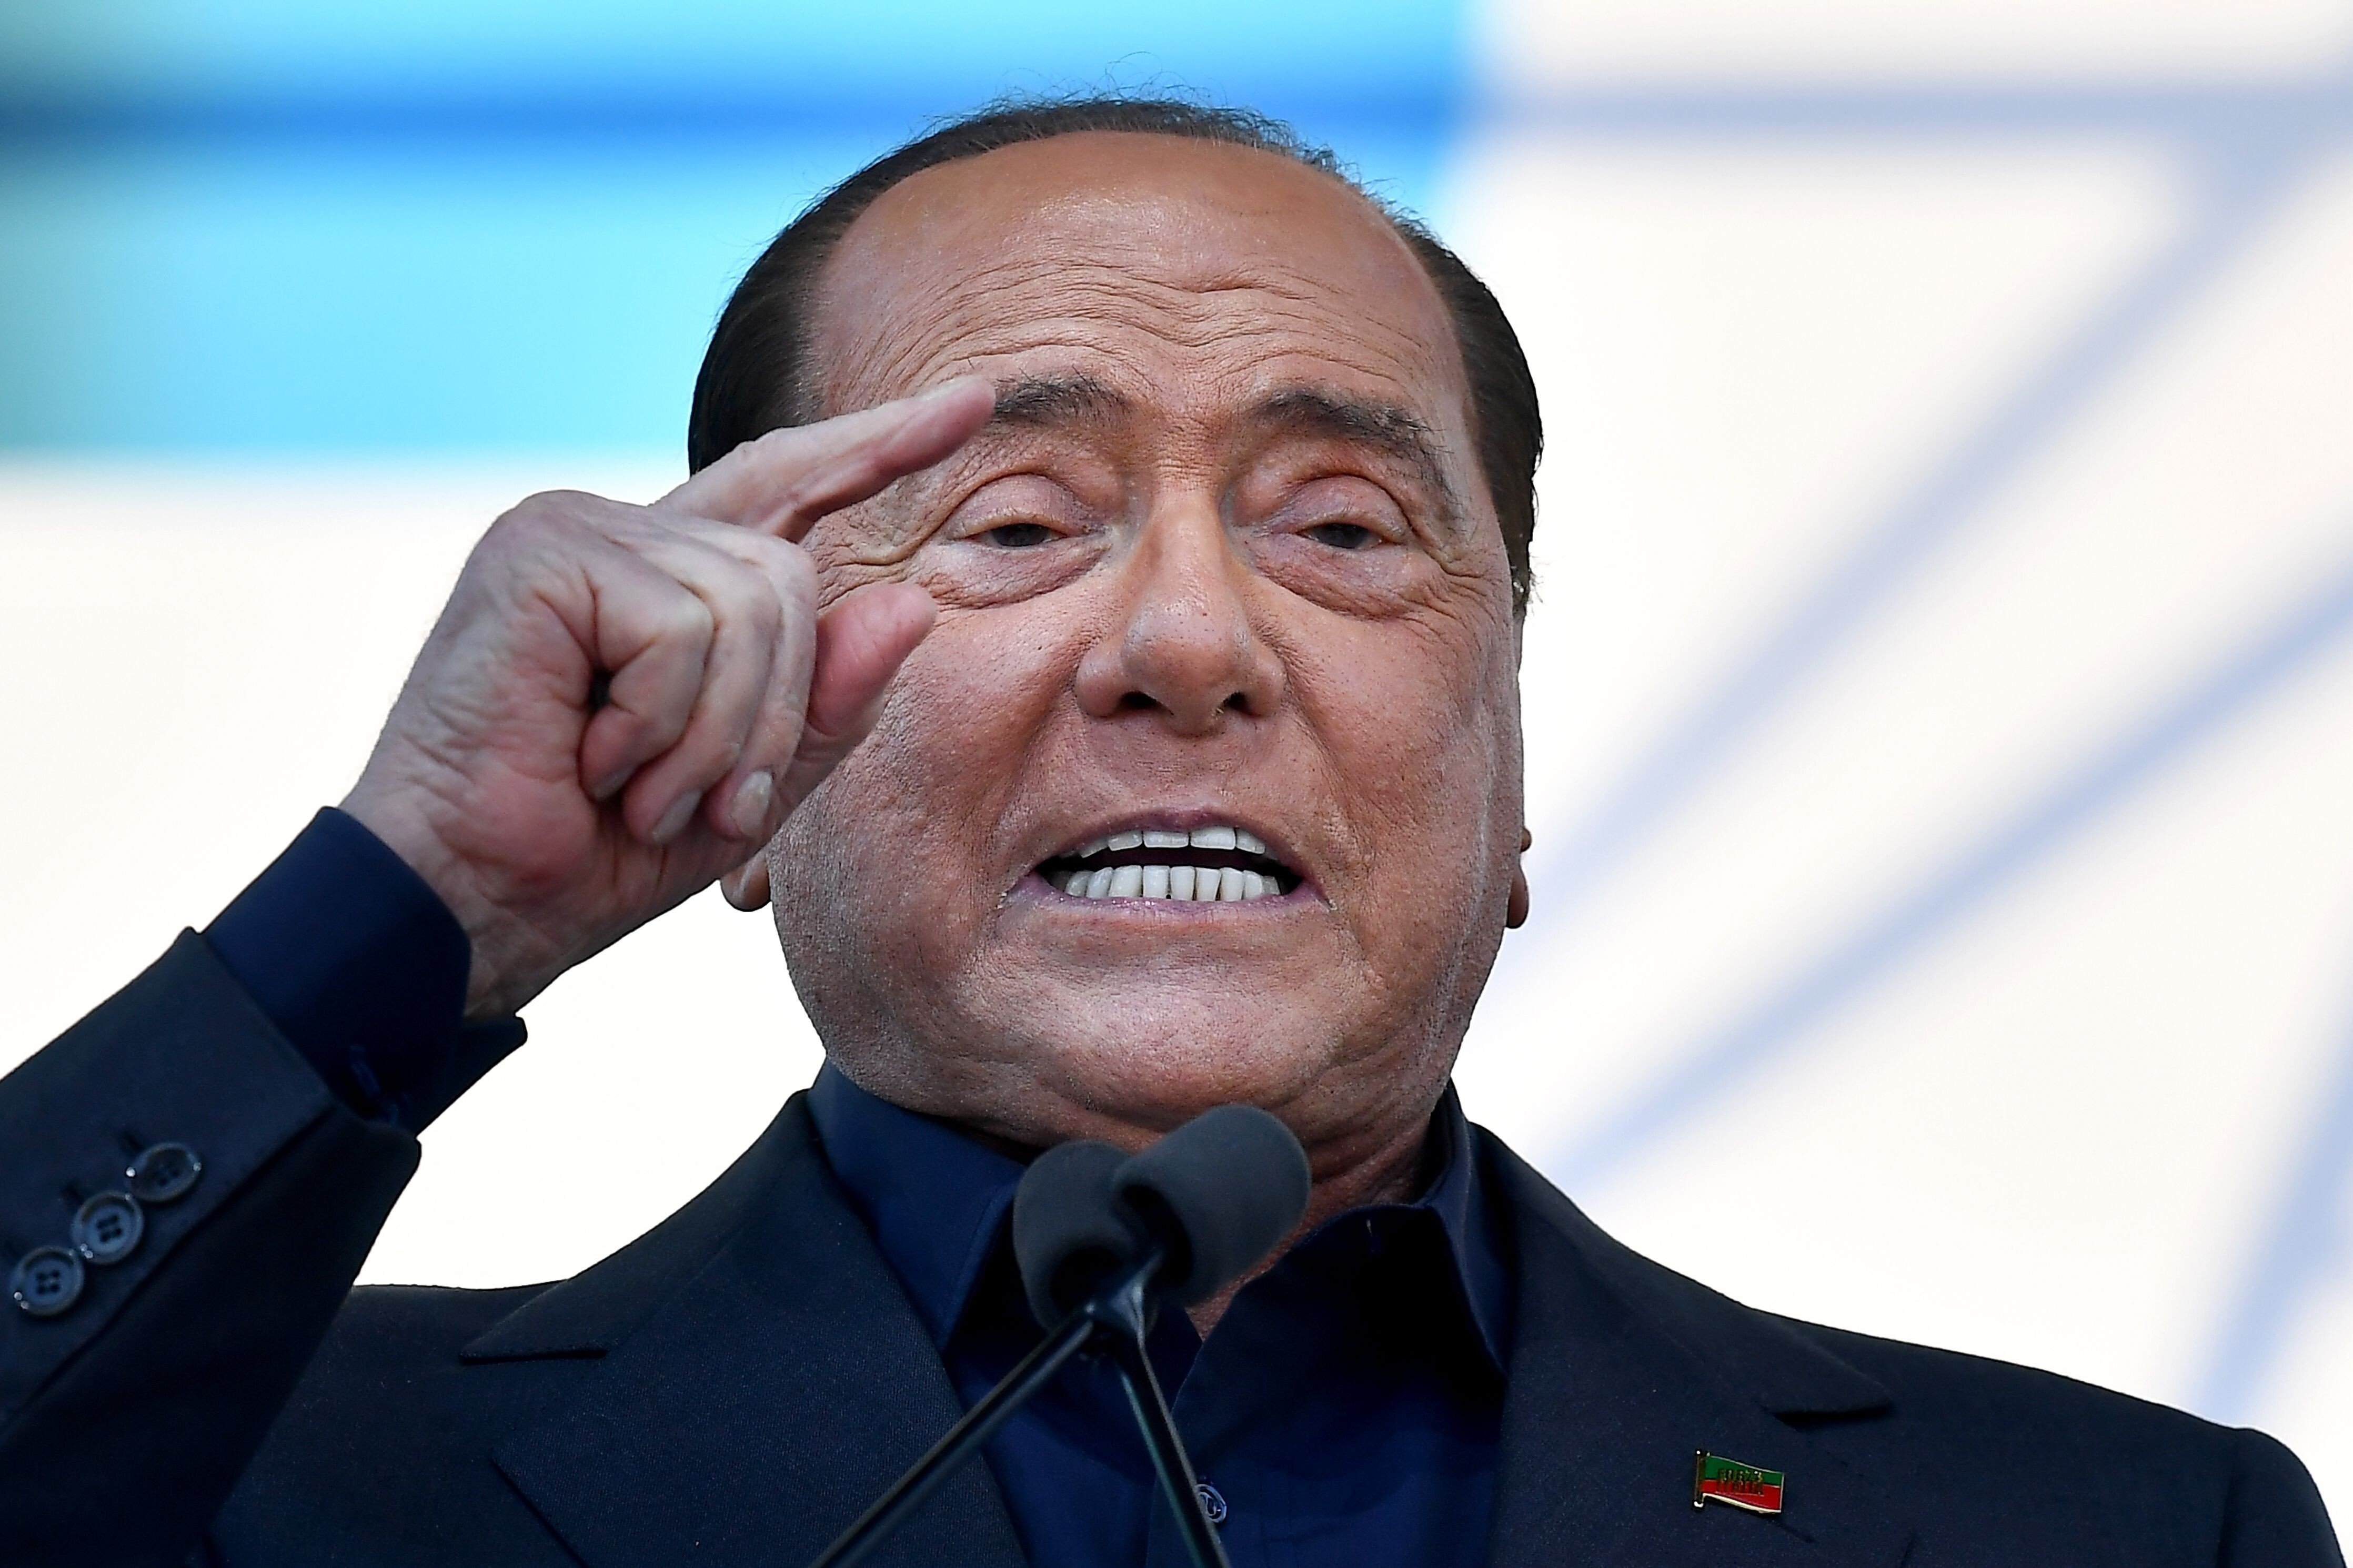 Former Italian prime minister Silvio Berlusconi speaks during a joint rally in Rome in October 2019. Photo: AFP